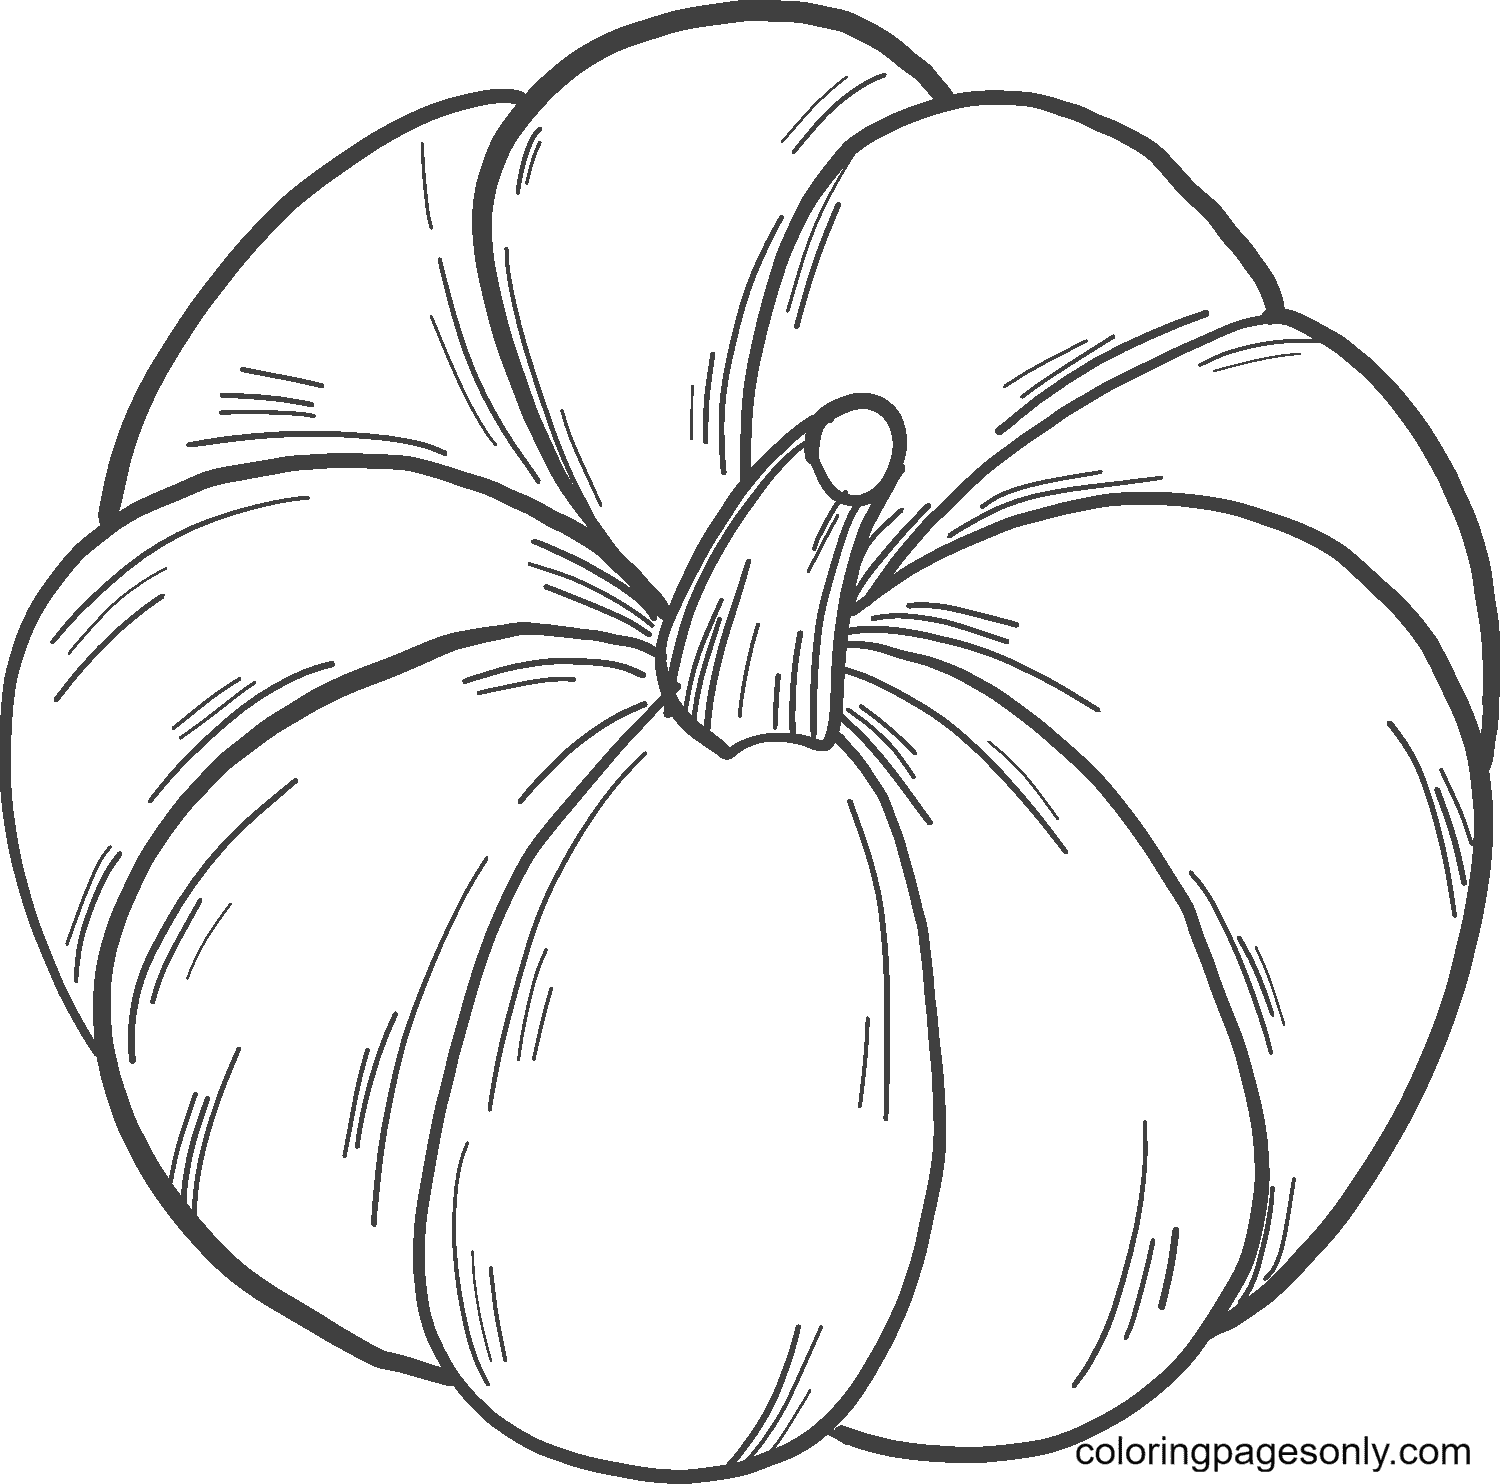 Pumpkin like a Flower Coloring Pages